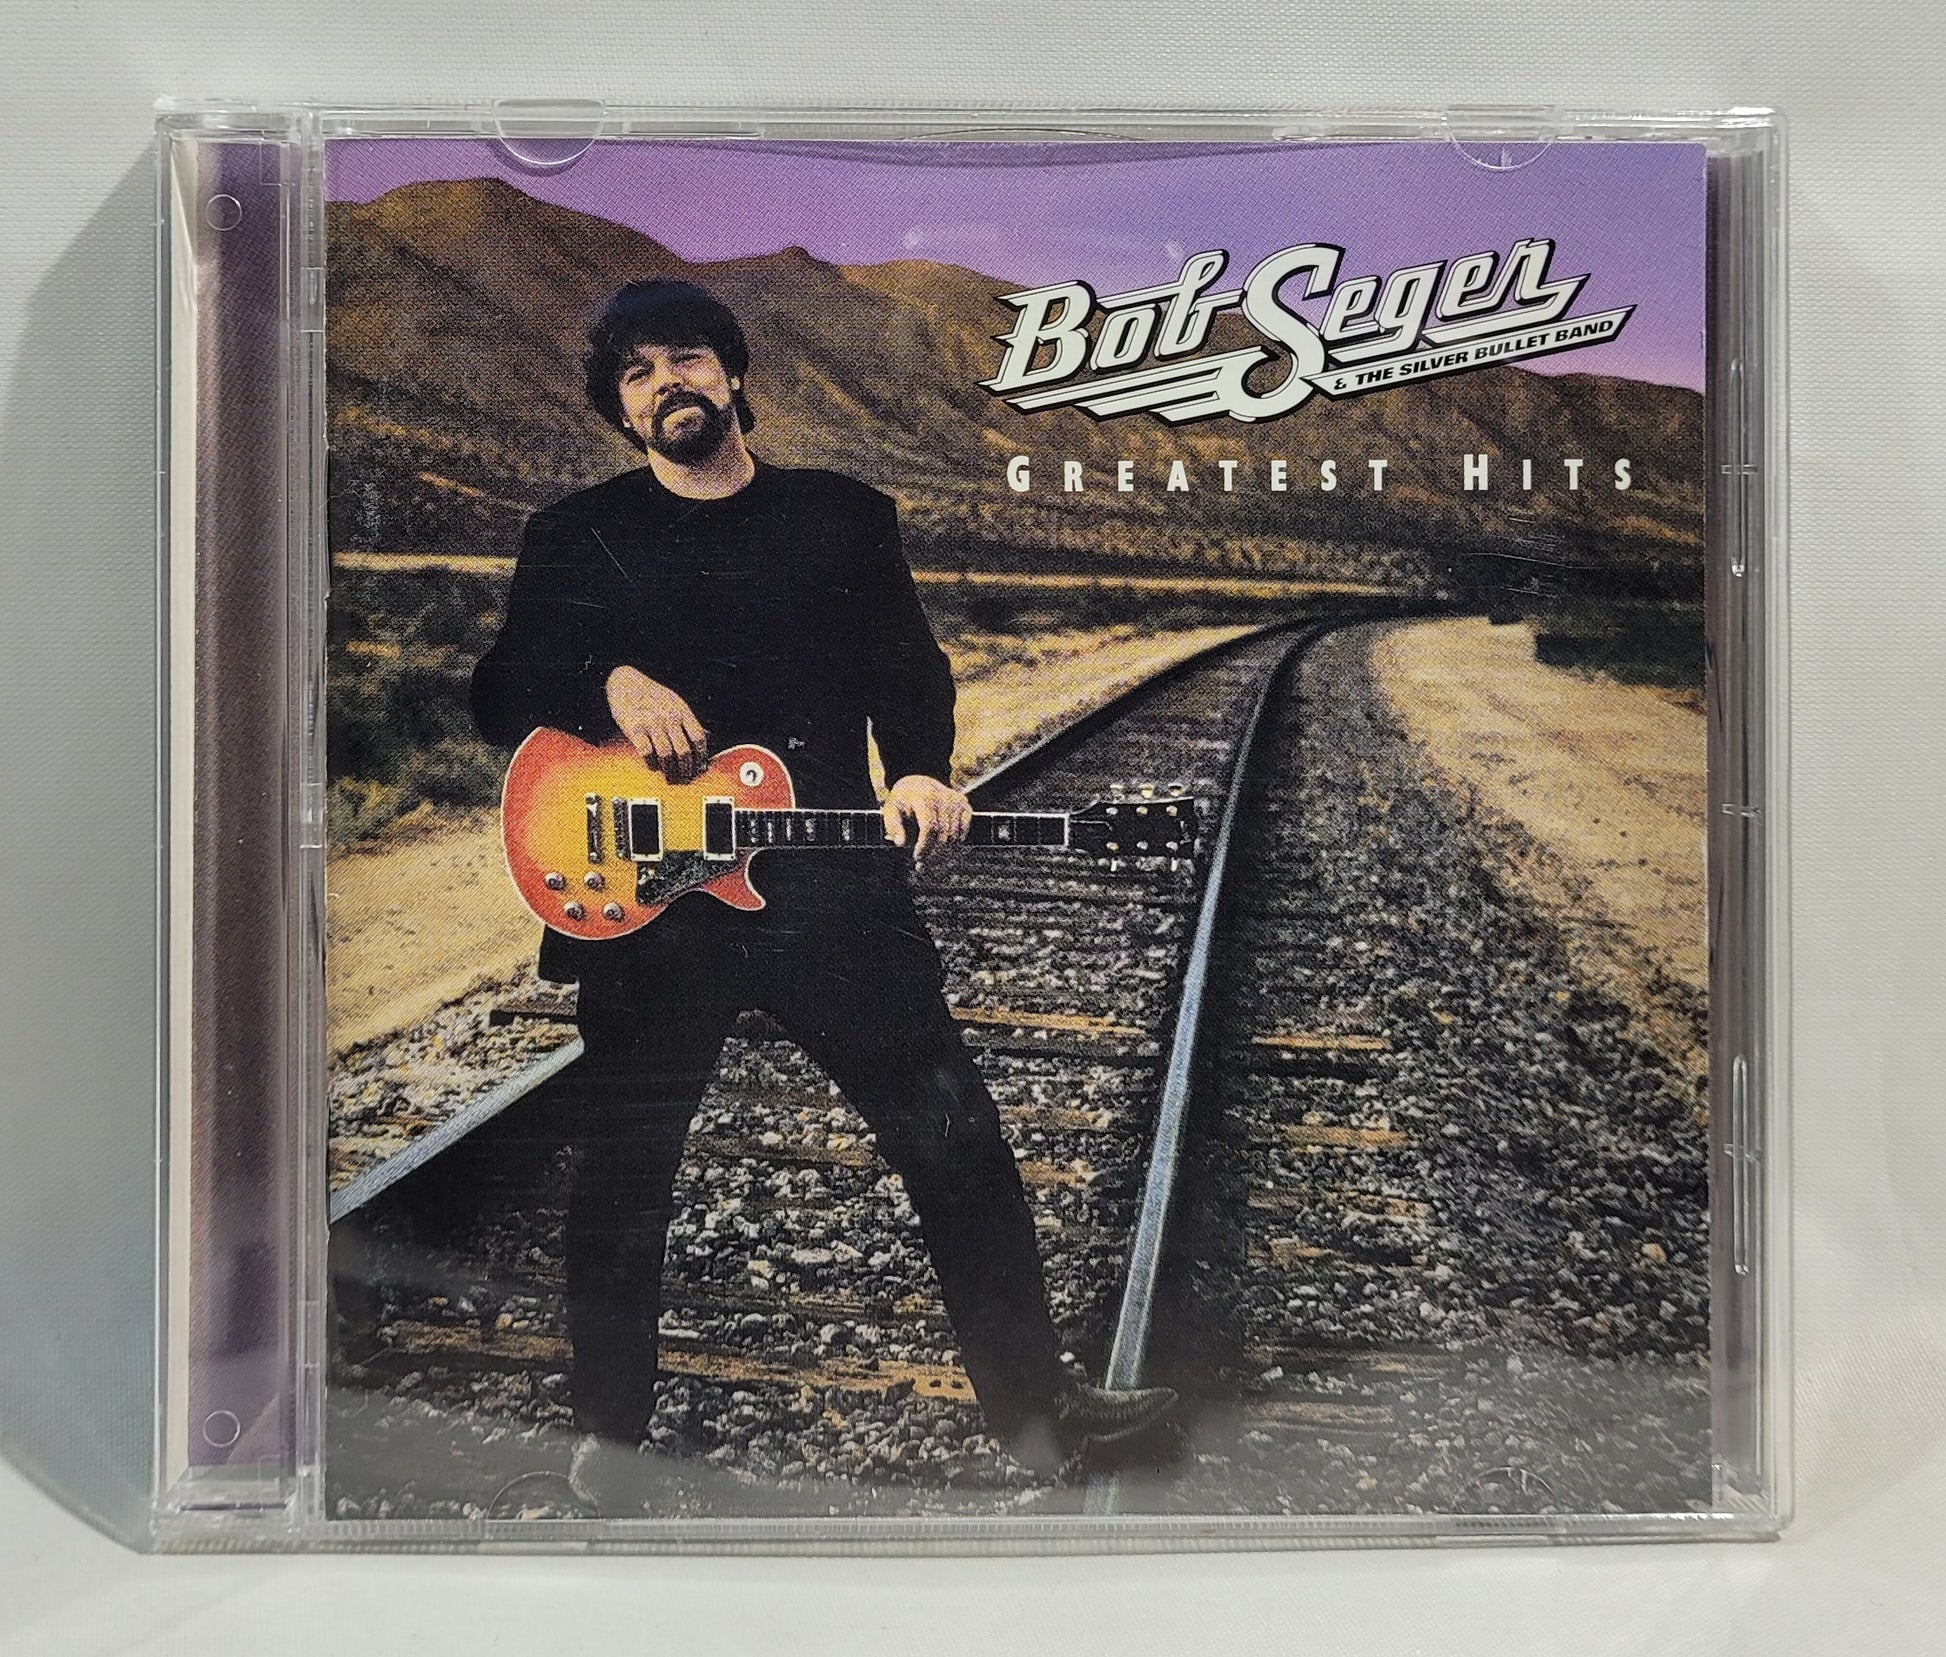 Bob Seger & The Silver Bullet Band - Greatest Hits [CD]